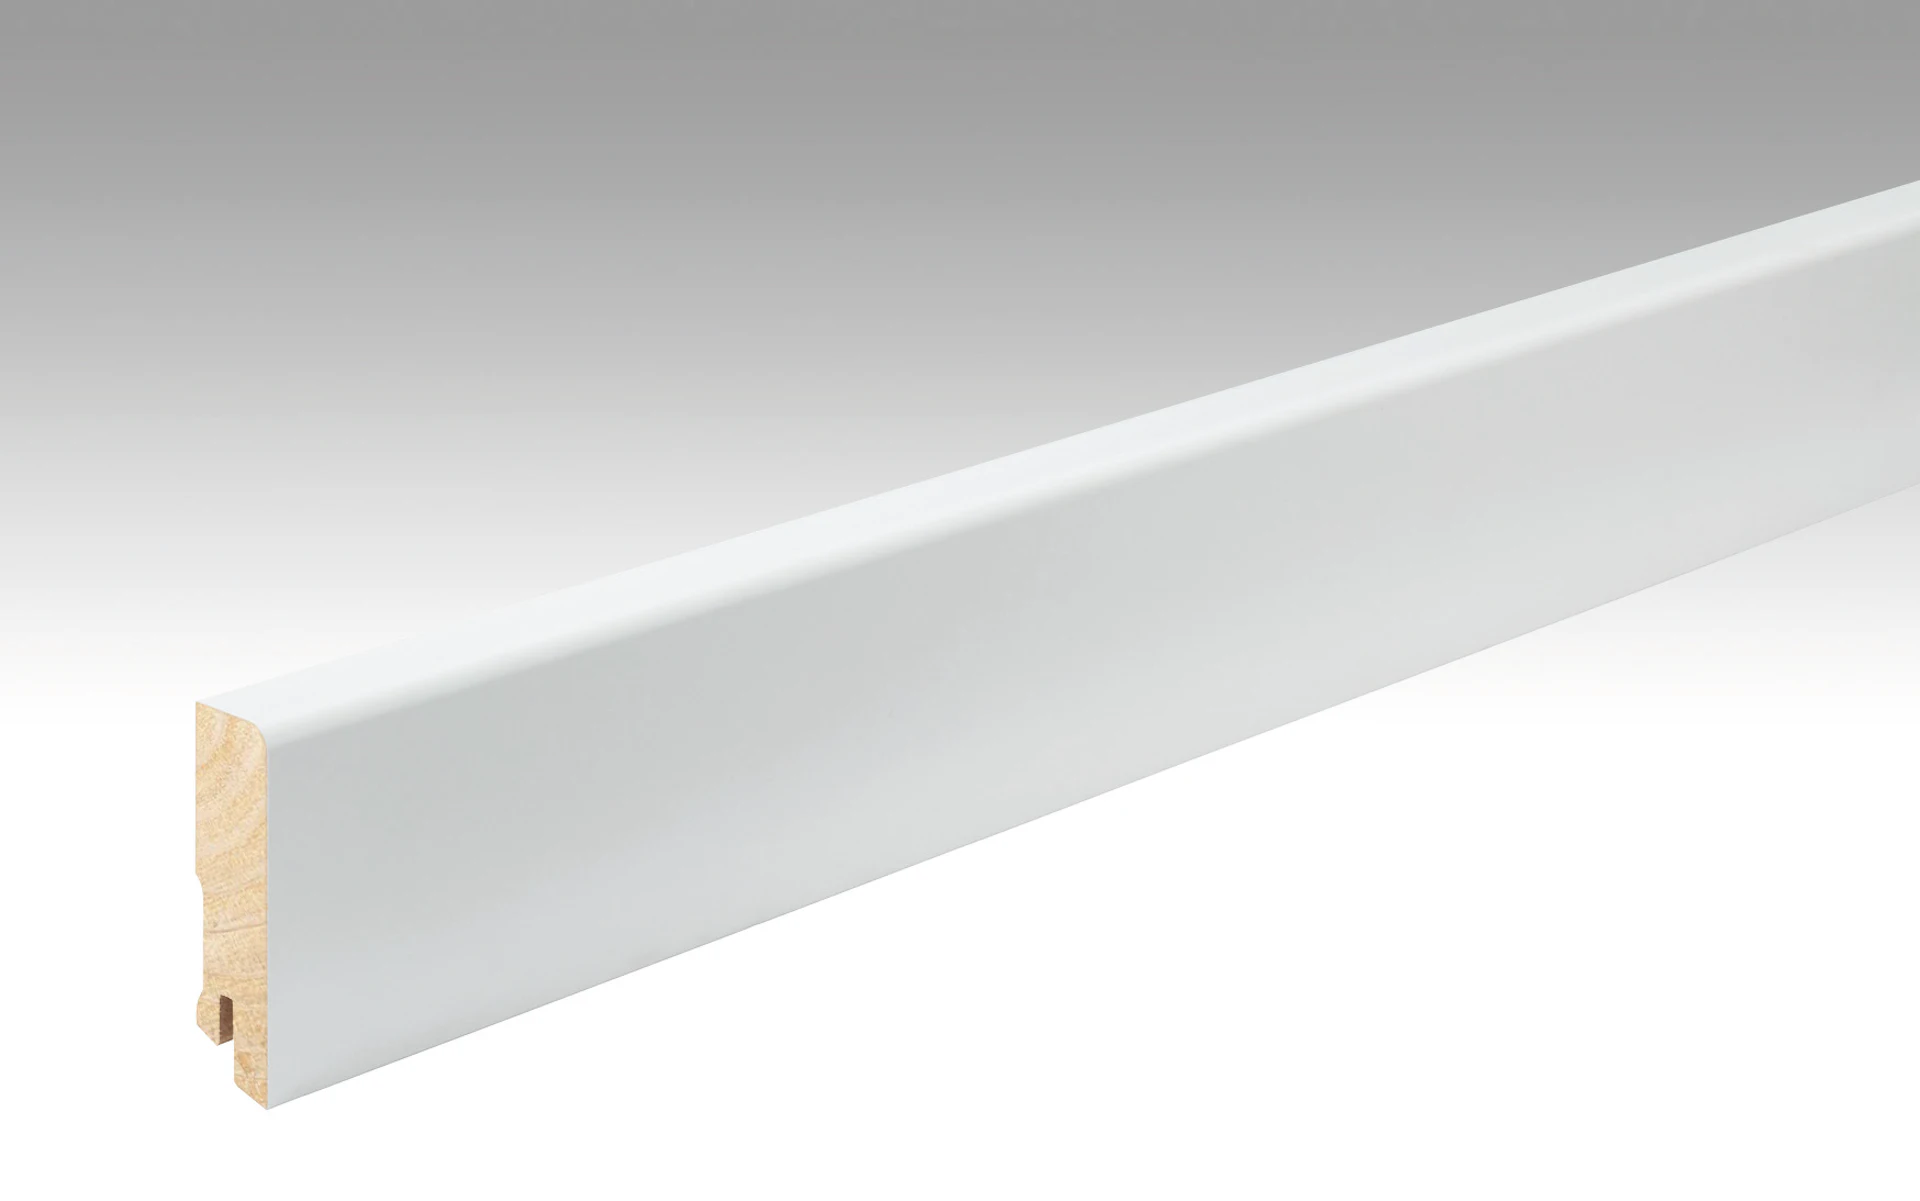 MEISTER Skirtings White DF (RAL 9016) 2266 - 2380 x 60 x 16 mm (200041-2380-02266)